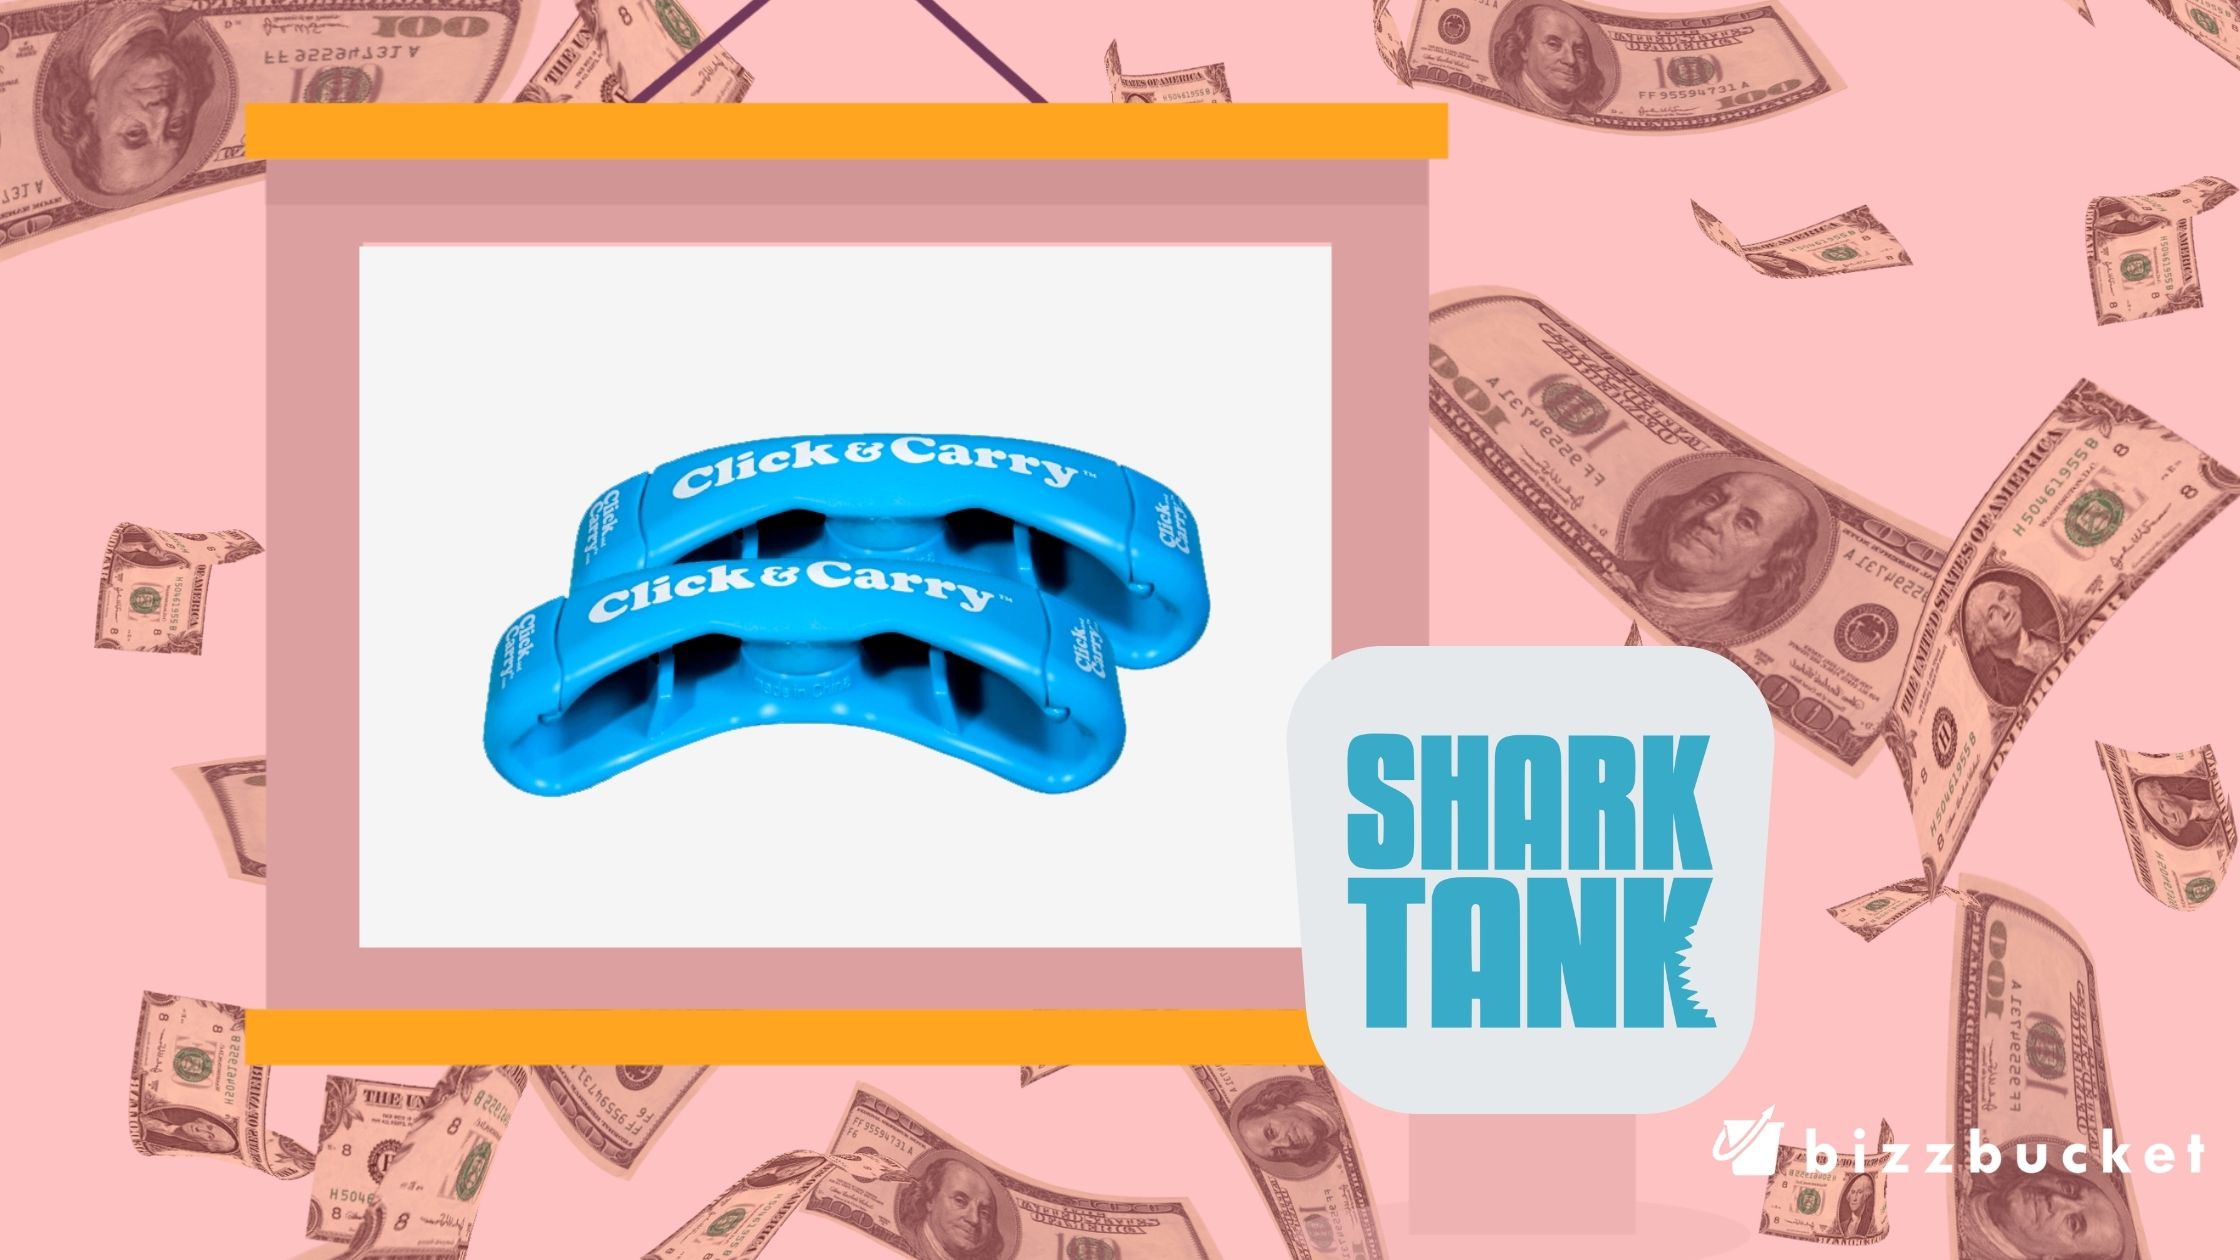 Click and Carry shark tank update